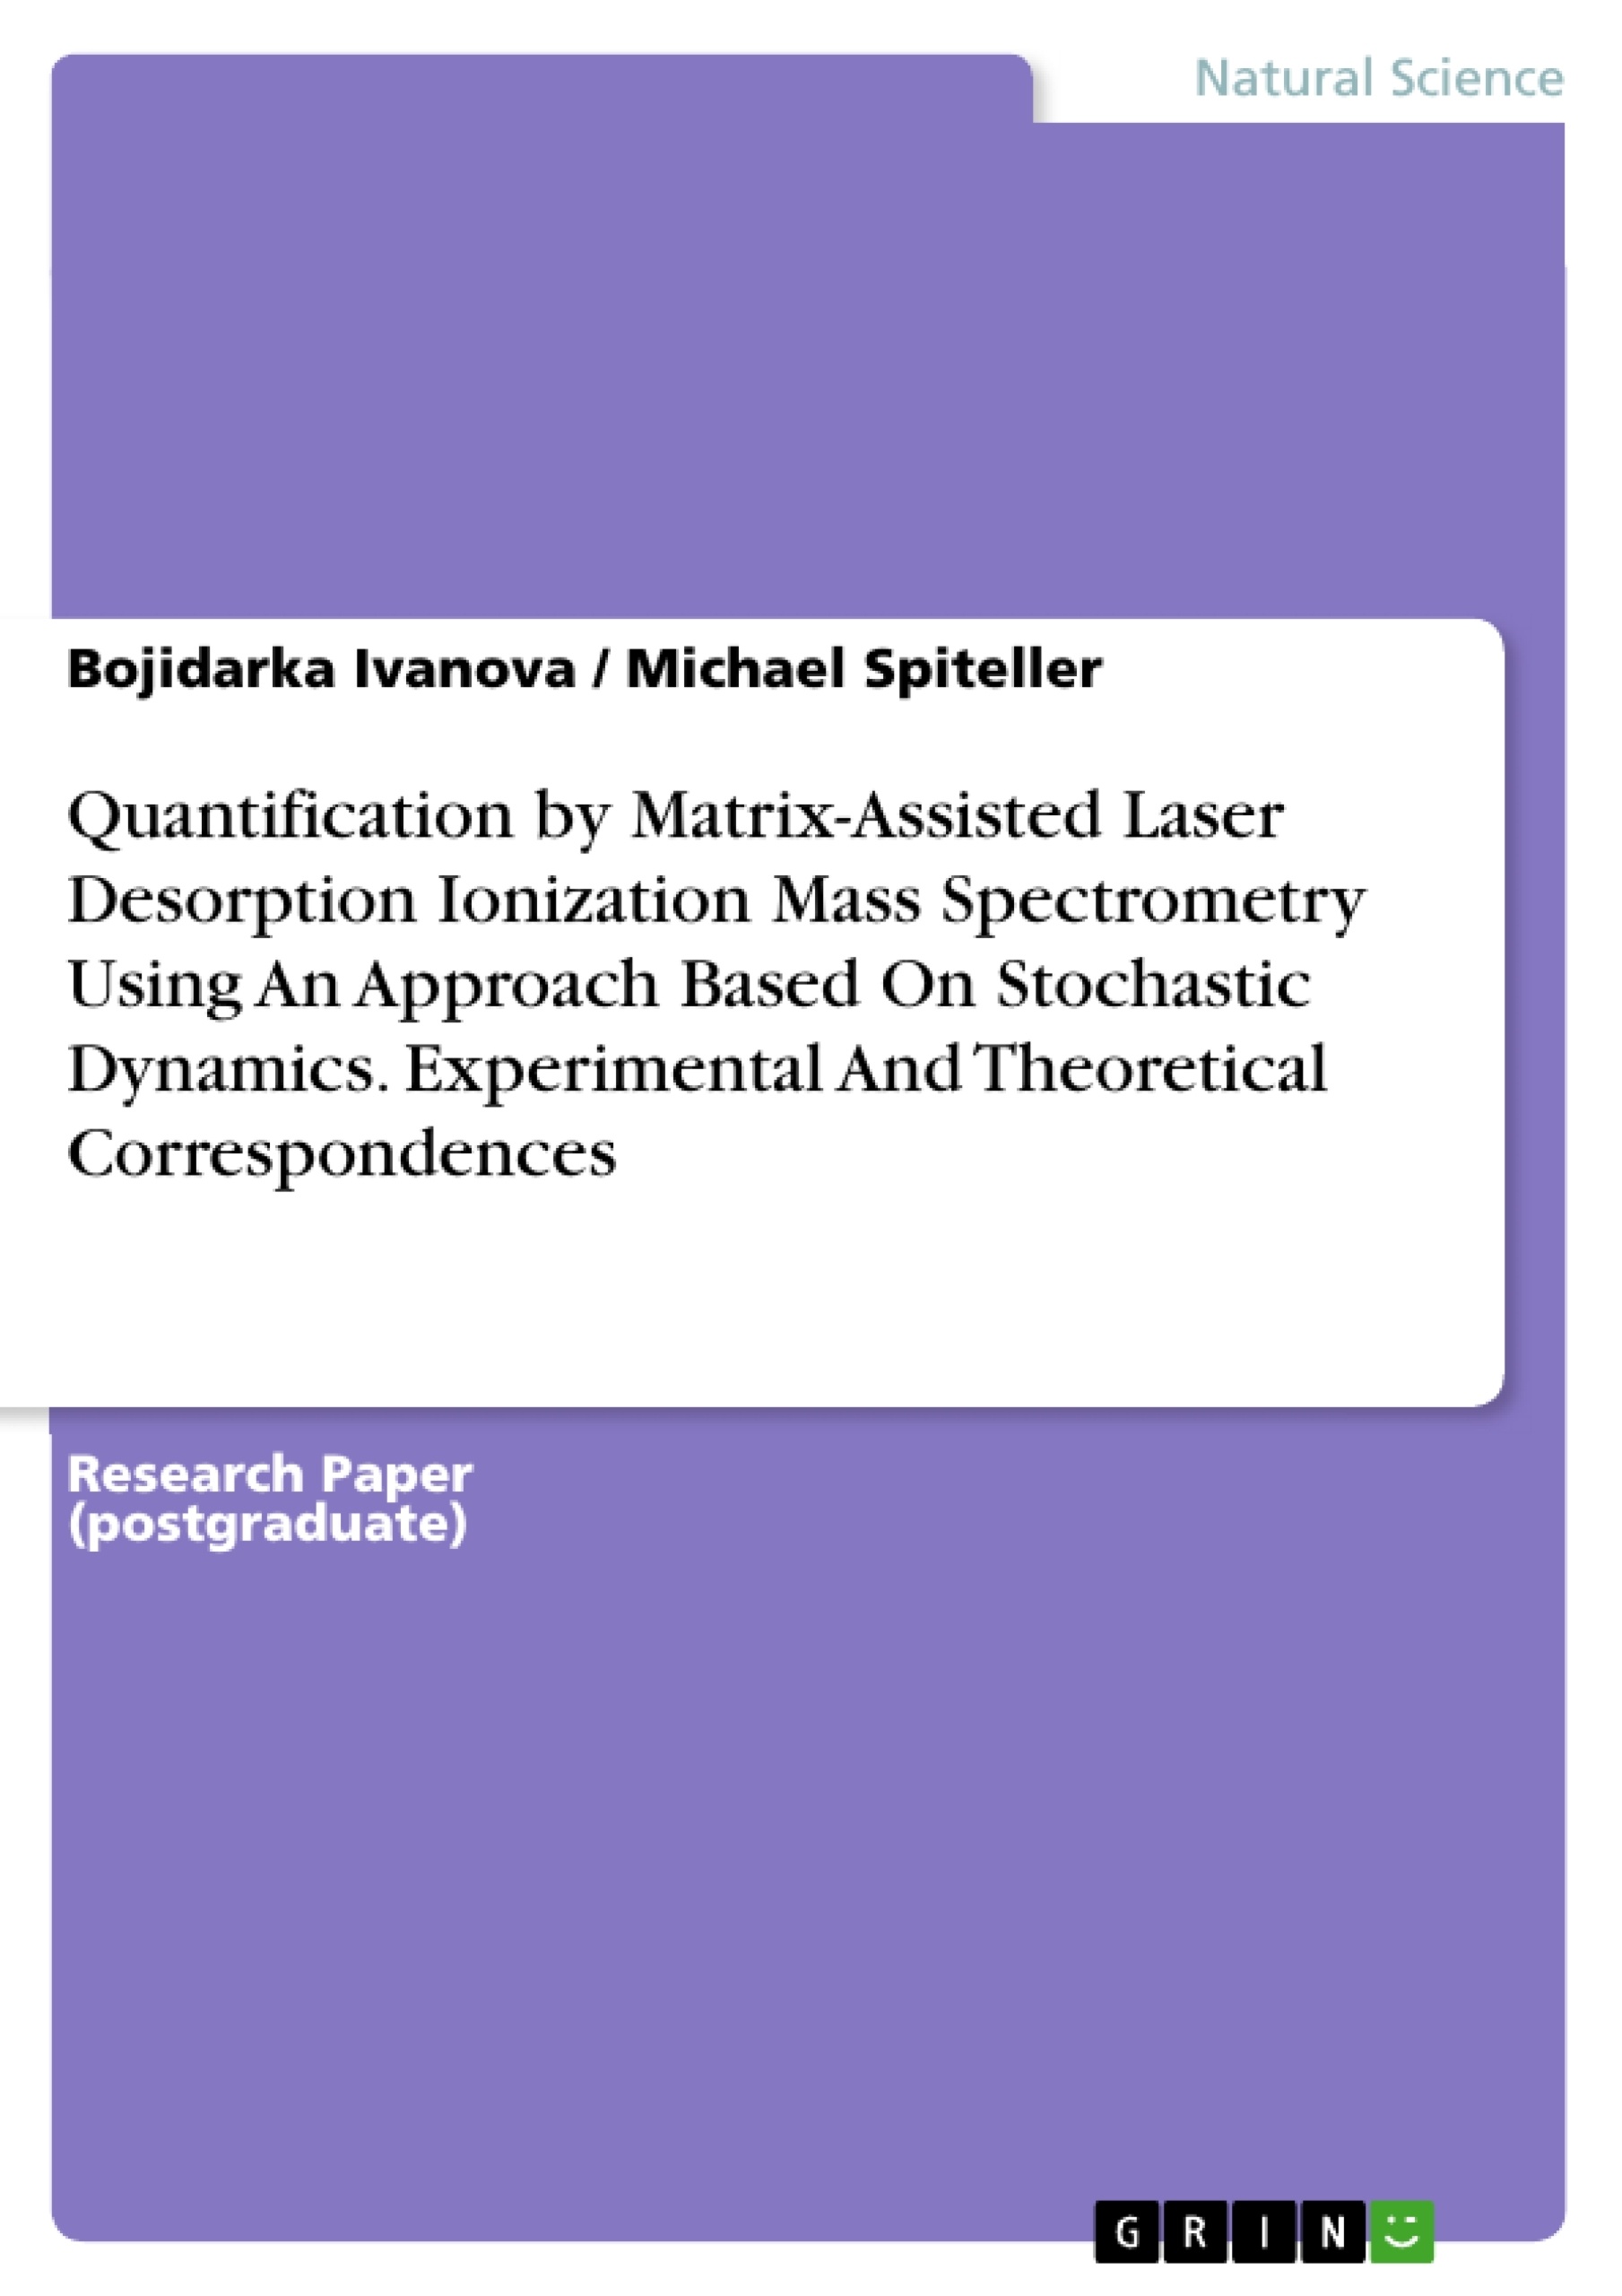 Title: Quantification by Matrix-Assisted Laser Desorption Ionization Mass Spectrometry Using An Approach Based On Stochastic Dynamics. Experimental And Theoretical Correspondences